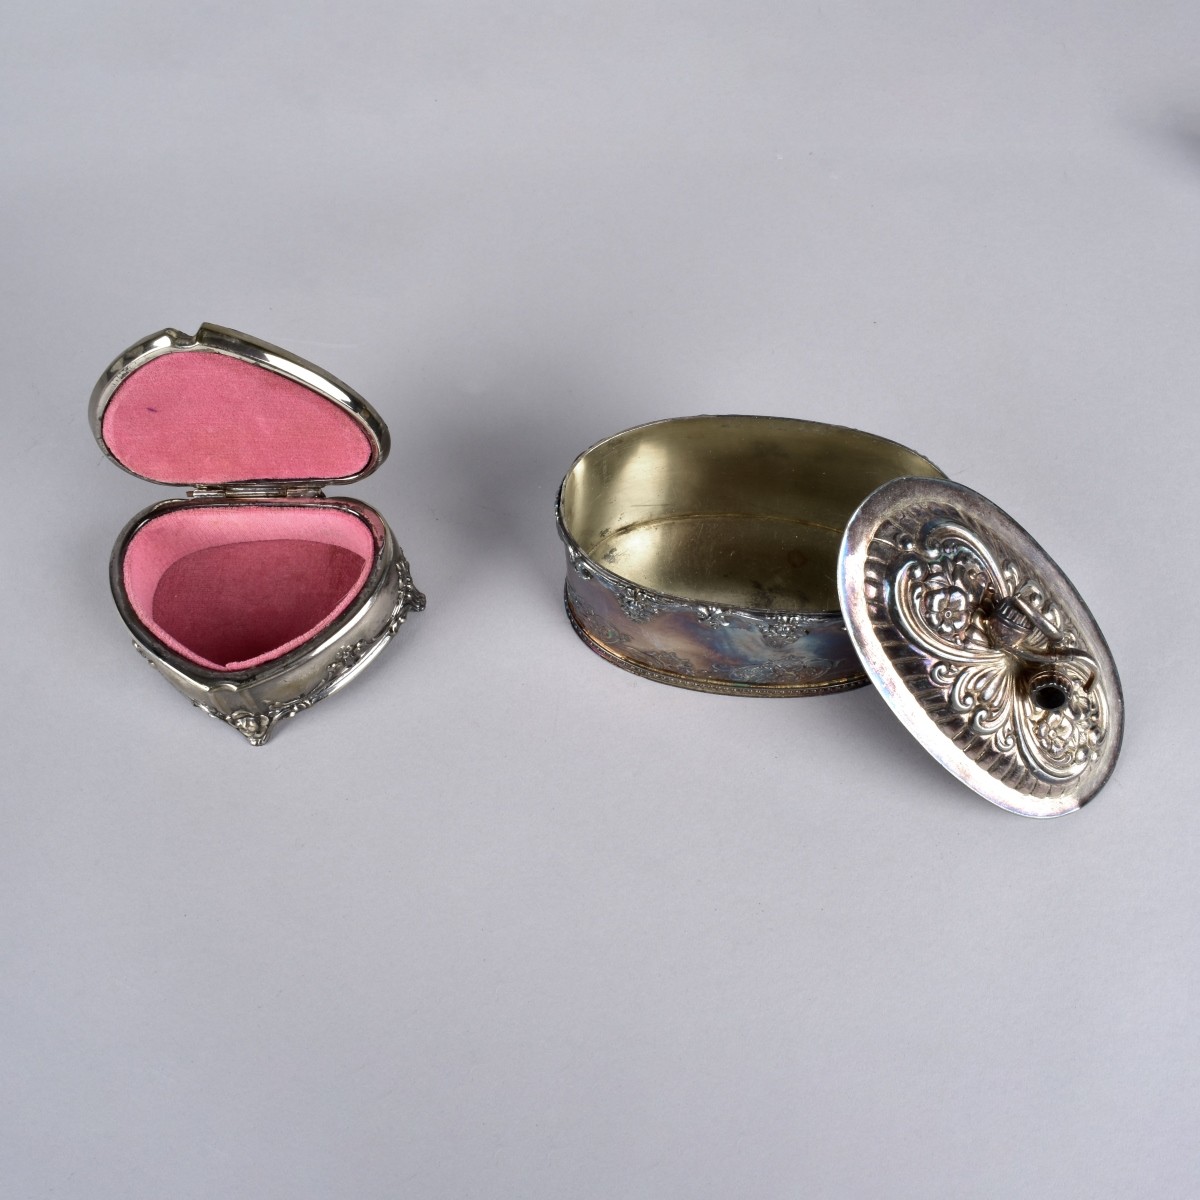 Seven Silver Plate Vanity Items